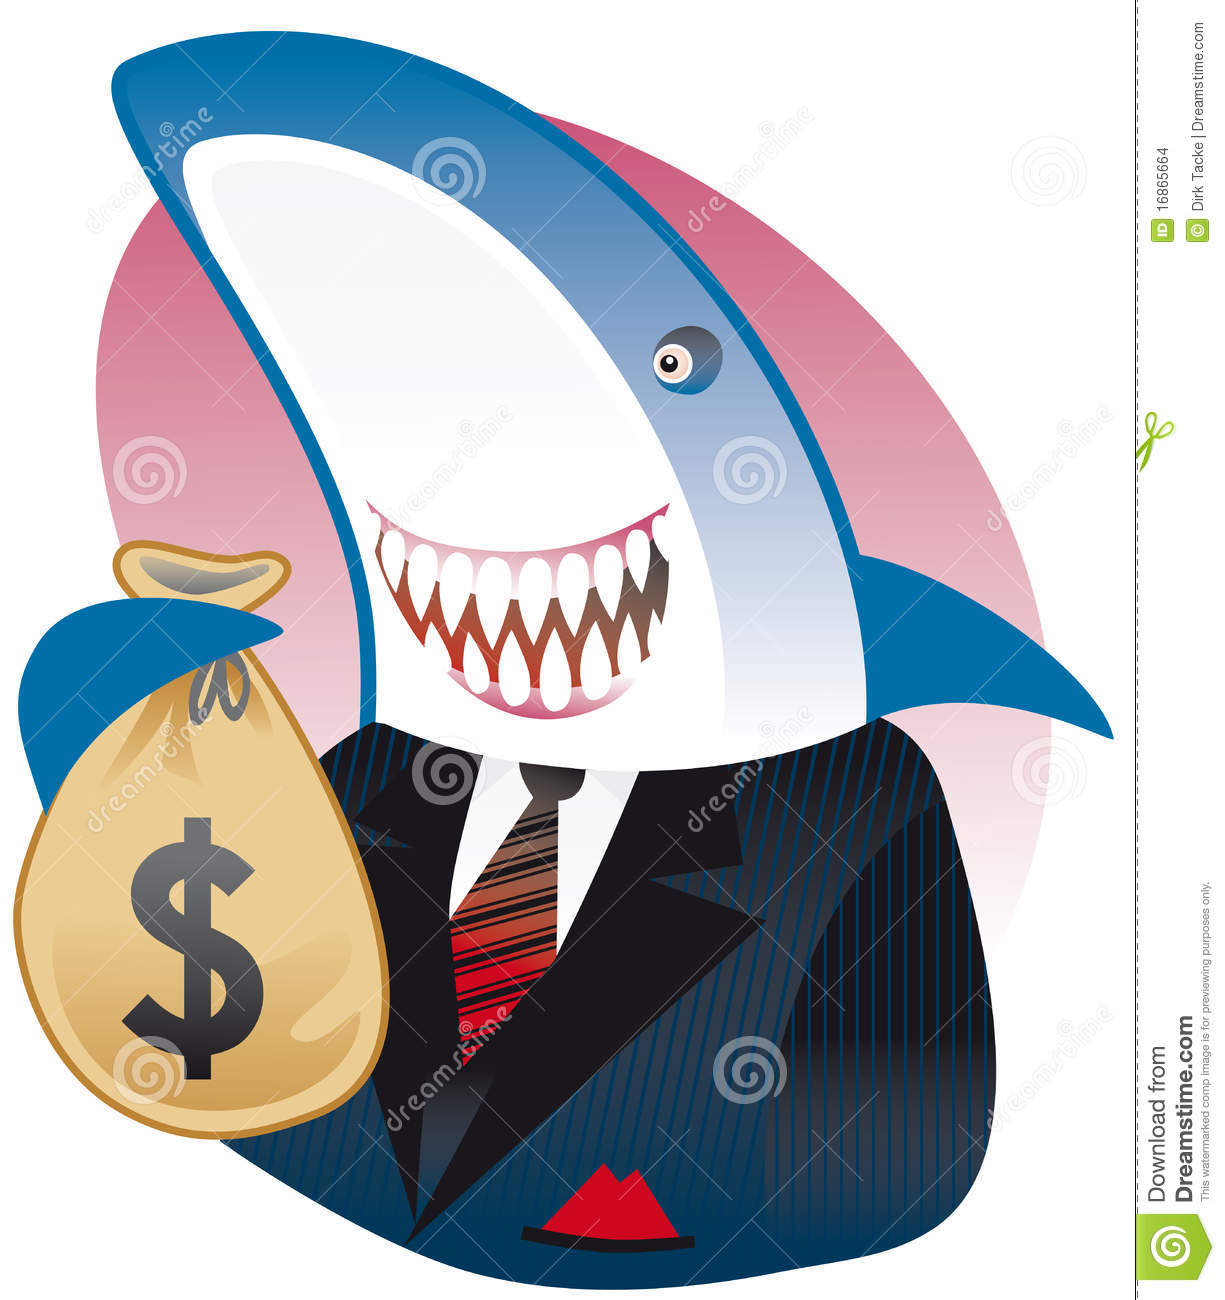 Grinning Loan Shark With Bag Of Dollars Stock Images   Image  16865664